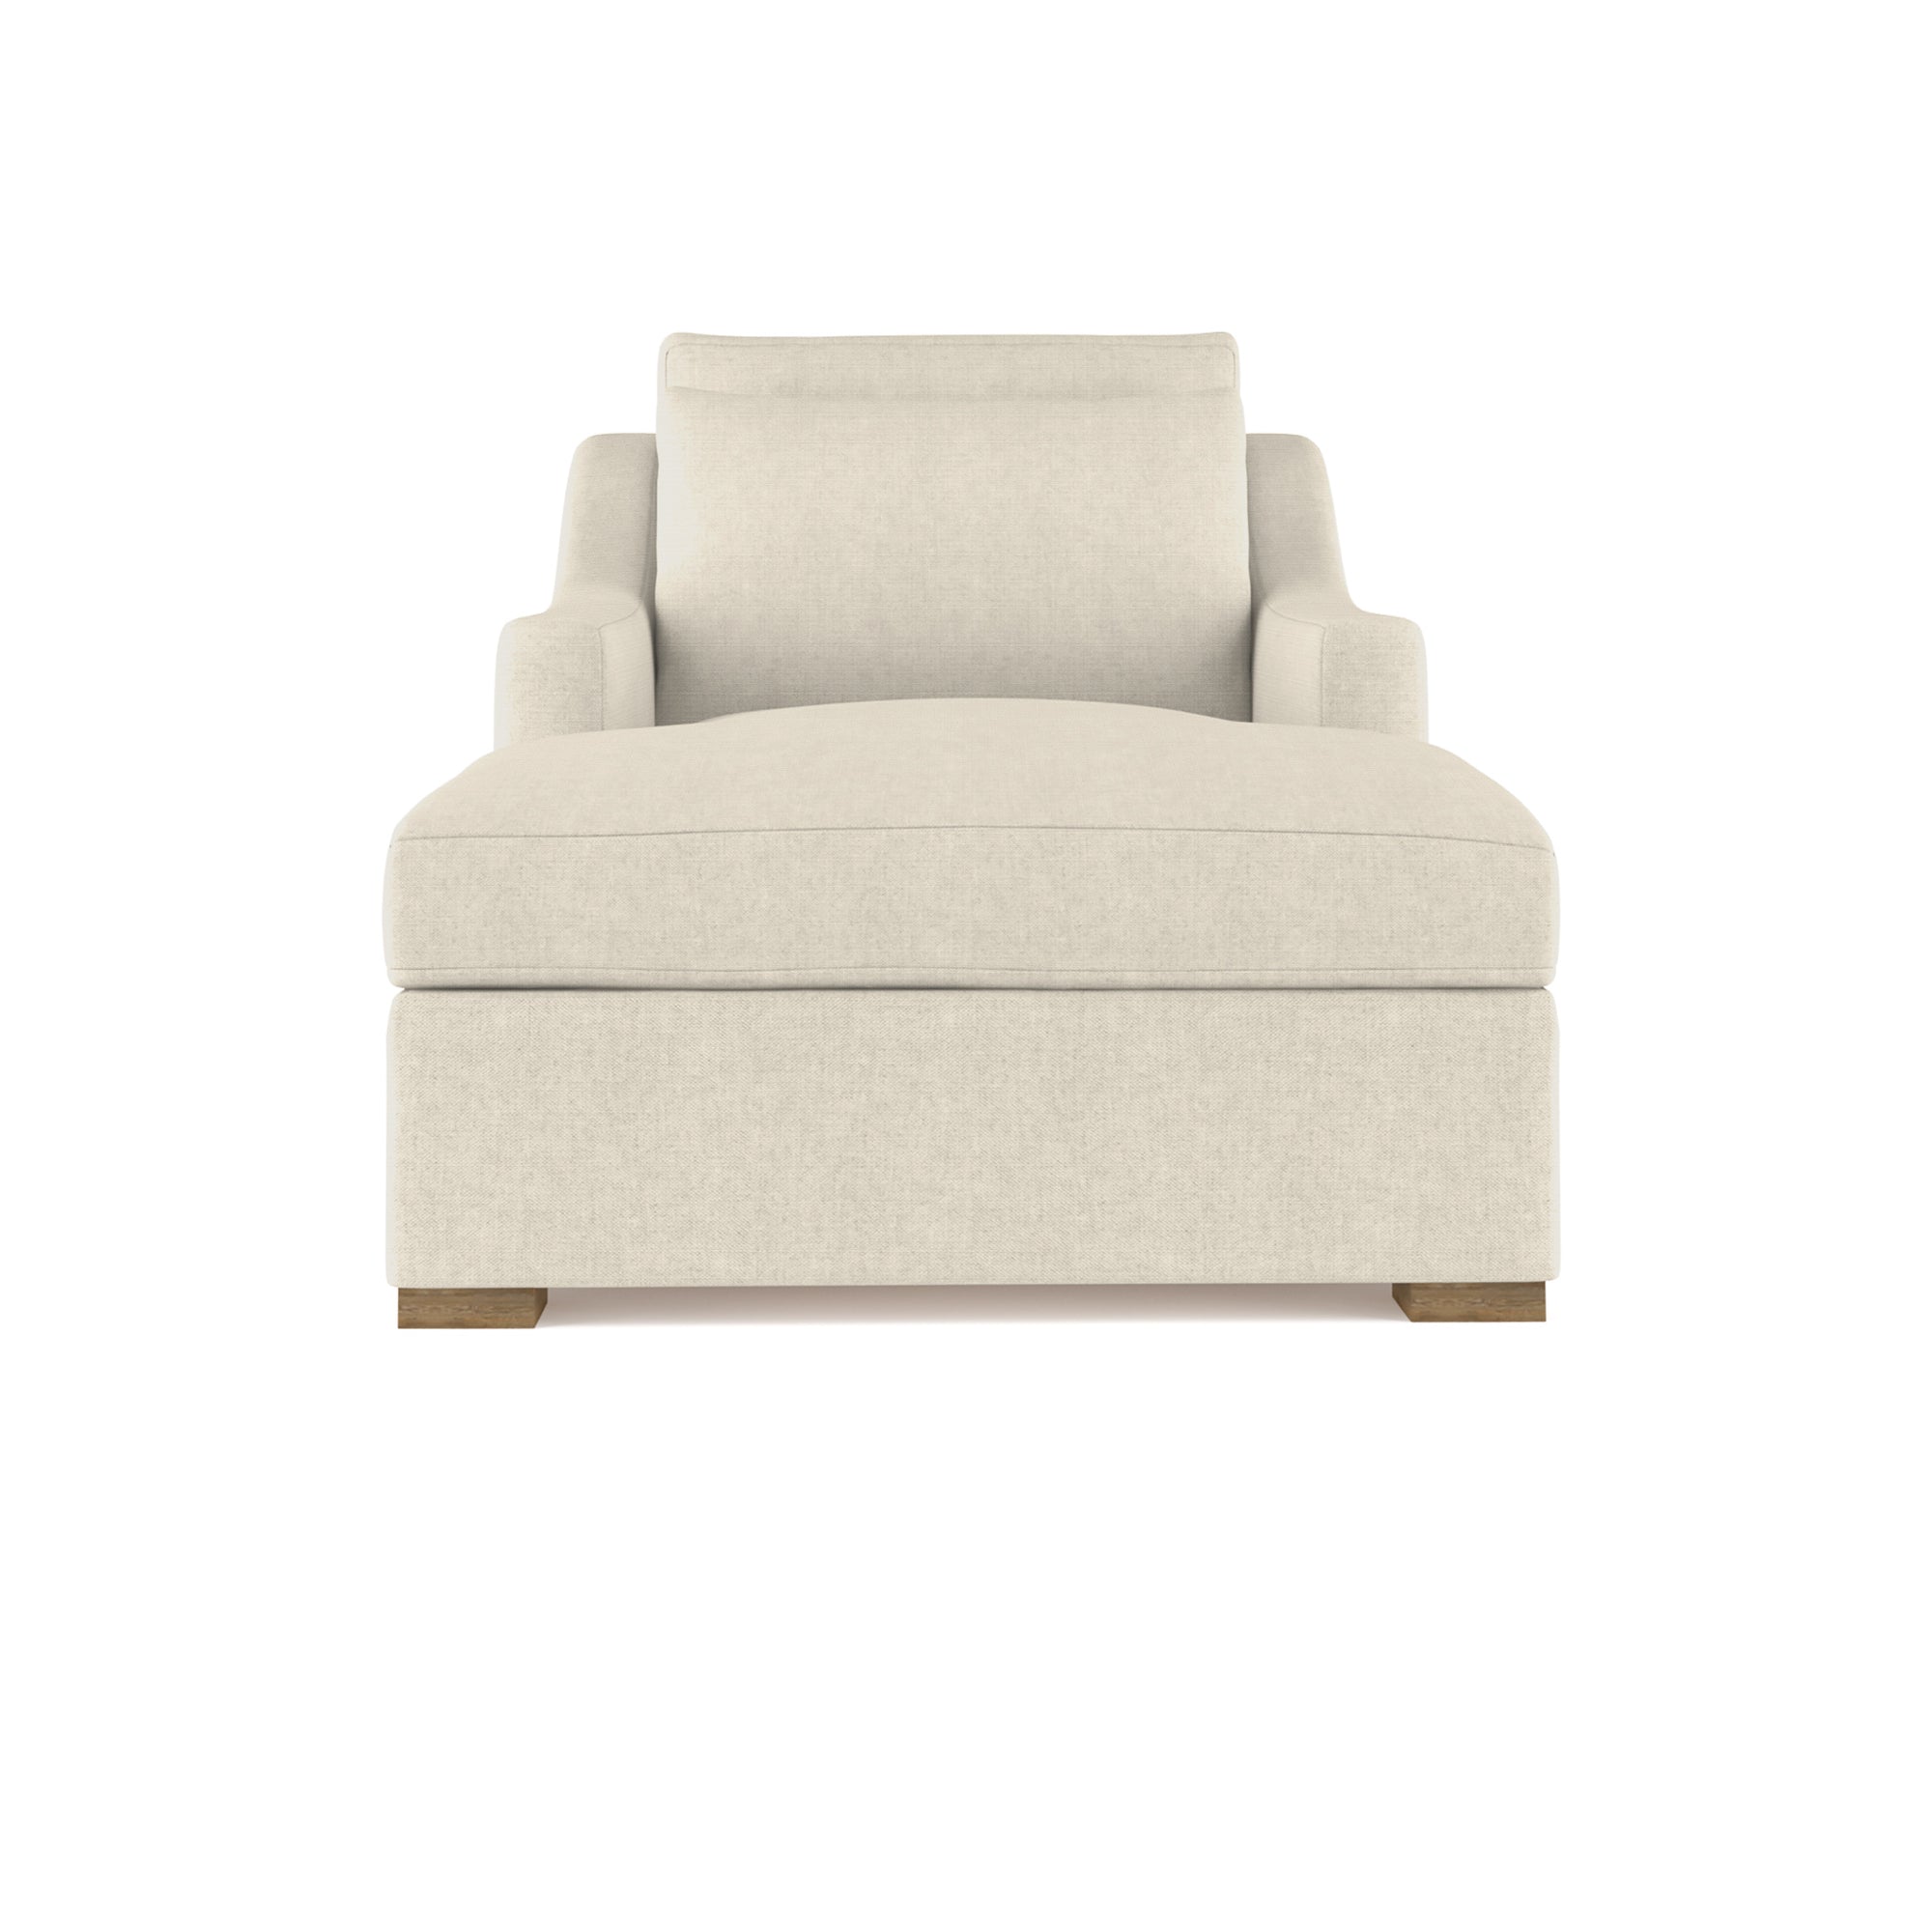 Crosby Chaise - Oyster Box Weave Linen